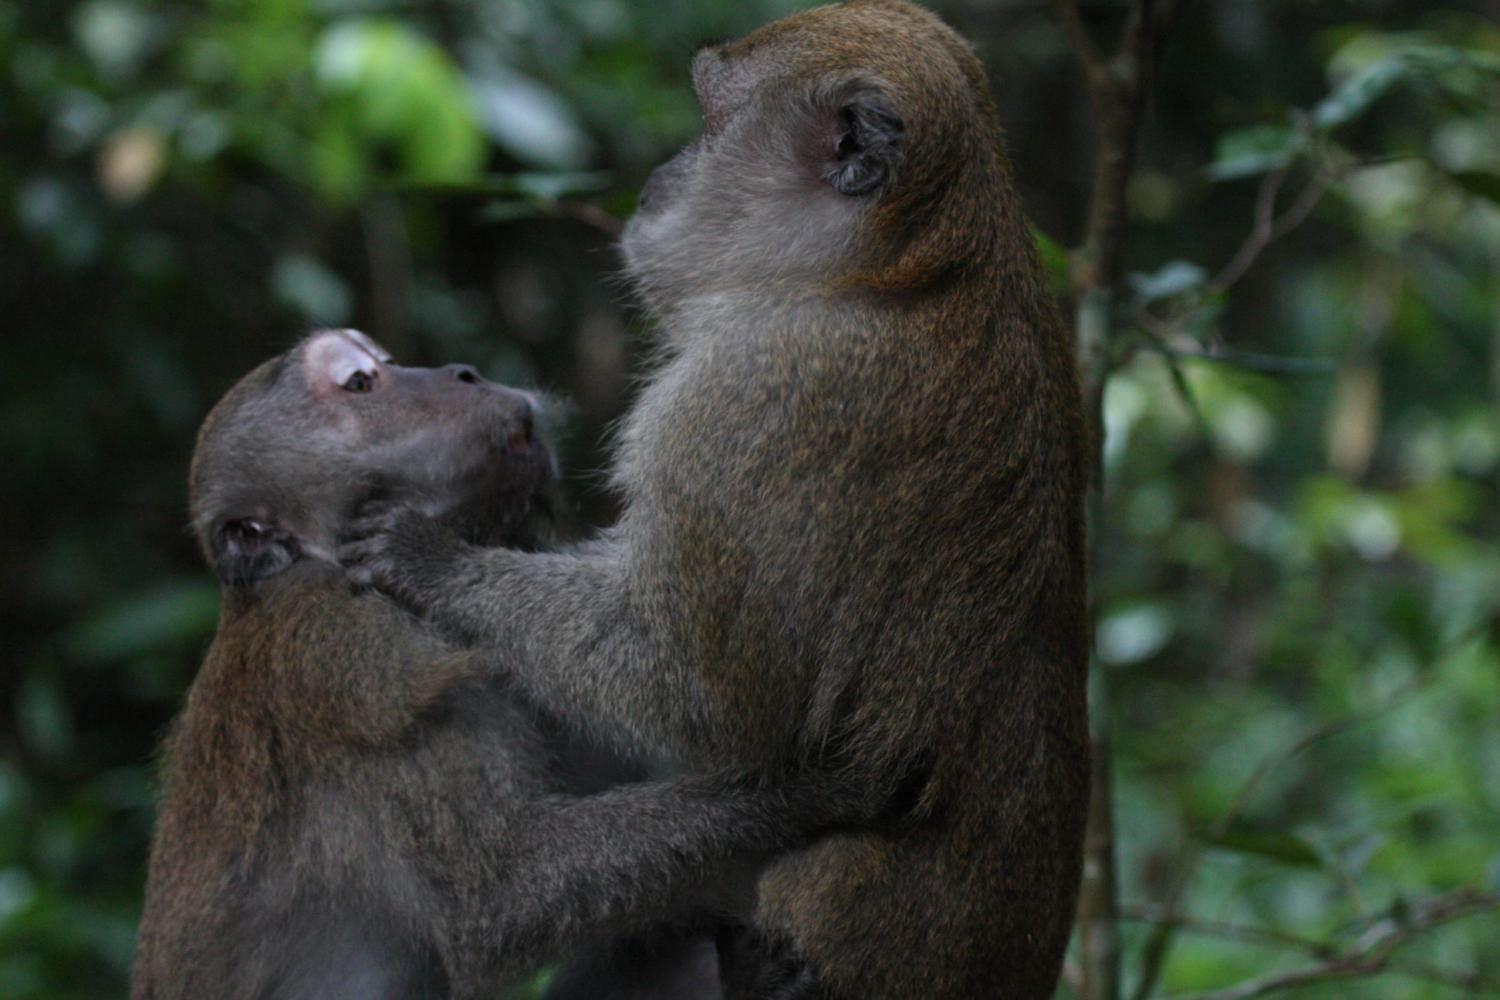 During affiliative contact, a cynomolgus macaque lip smacks to maintain peaceful contact; his companion lip smacks in return to confirm affiliation. 